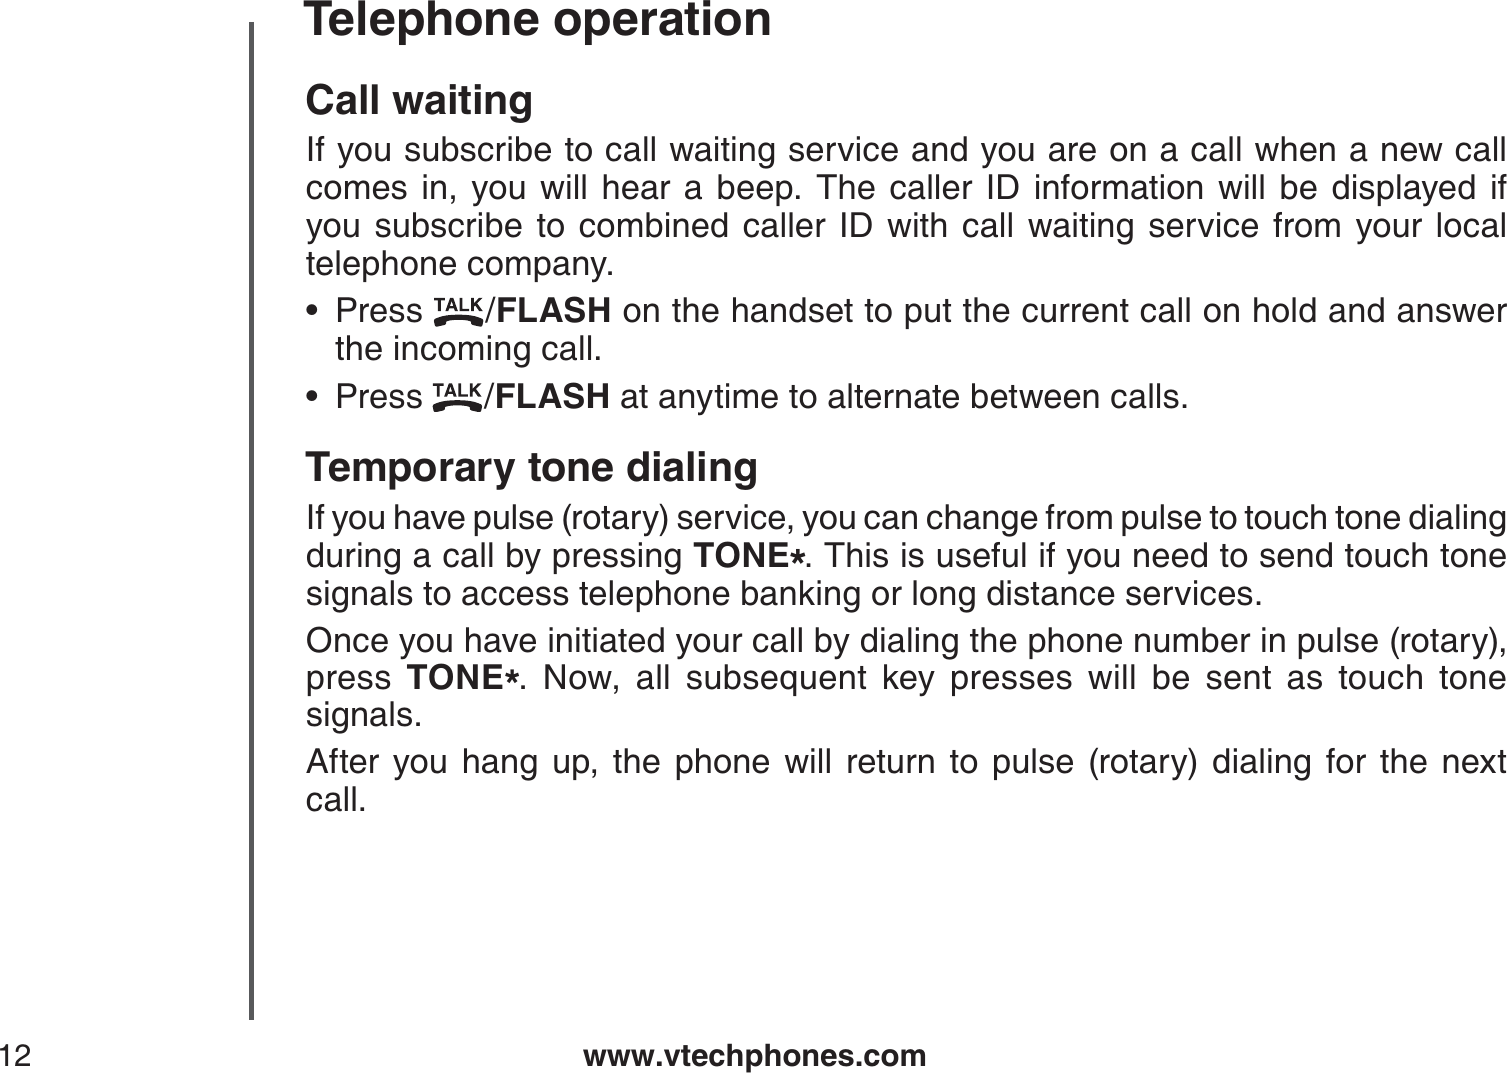 www.vtechphones.com12Telephone operationCall waitingIf you subscribe to call waiting service and you are on a call when a new call comes in, you will hear a beep. The caller ID information will be displayed ifyou subscribe to combined caller ID with call waiting service from your local telephone company.Press  /FLASH on the handset to put the current call on hold and answer the incoming call.Press  /FLASH at anytime to alternate between calls.Temporary tone dialingIf you have pulse (rotary) service, you can change from pulse to touch tone dialing during a call by pressing TONE*. This is useful if you need to send touch tone signals to access telephone banking or long distance services.Once you have initiated your call by dialing the phone number in pulse (rotary), press  TONE*. Now, all subsequent key presses will be sent as touch tone signals.After you hang up, the phone will return to pulse (rotary) dialing for the next call.••